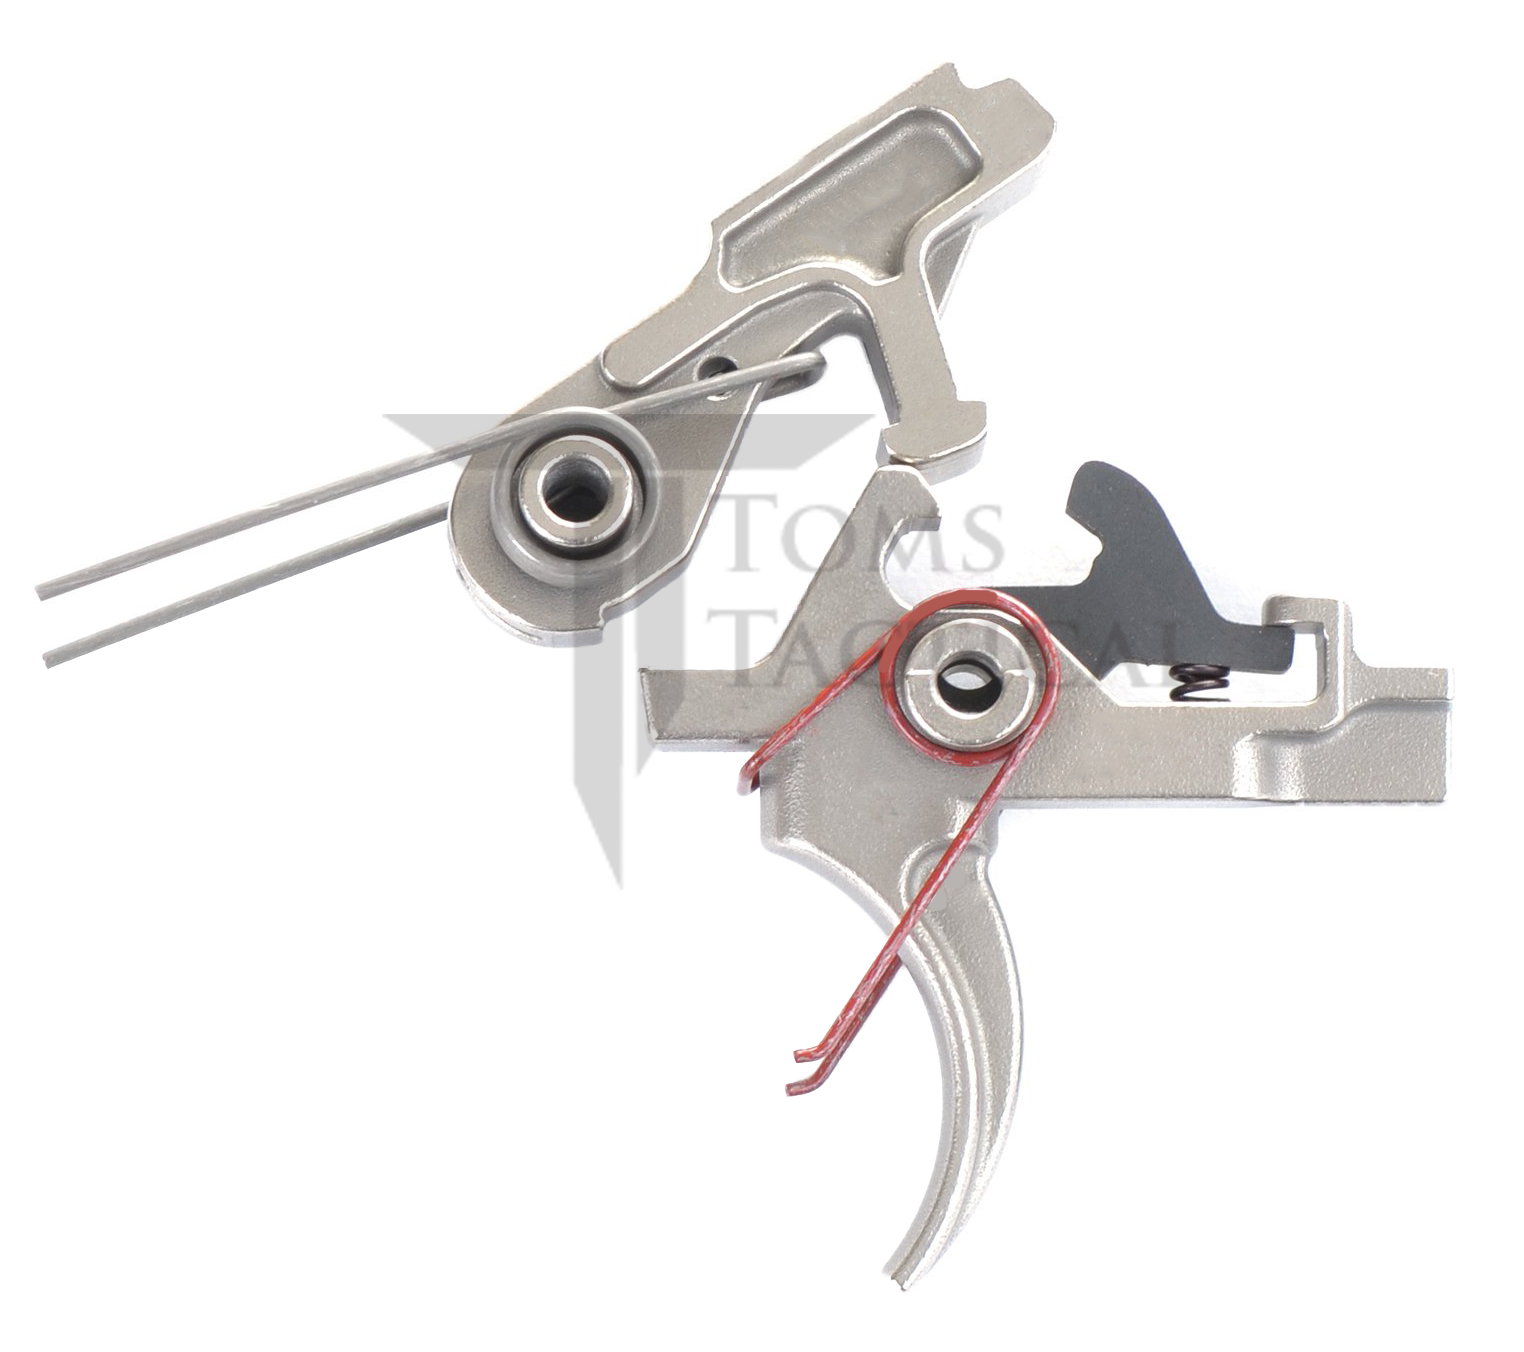 Two Stage AR15 Nickel Boron Trigger Group 4.5 lb - $79.95 Shipped | gun ...